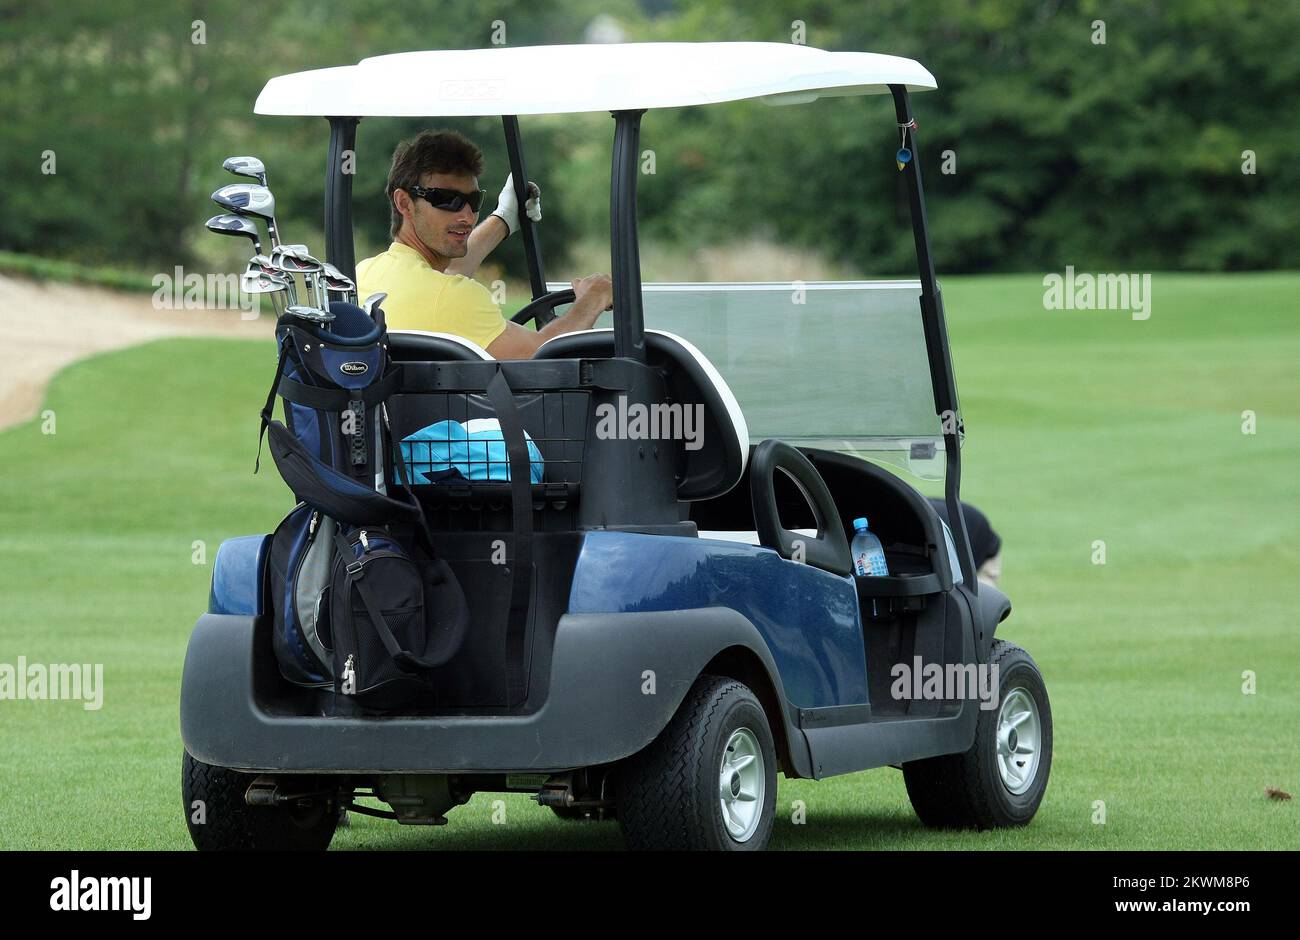 For the duration of the 22nd Studena Croatia Open Umag, ATP tour tennis  player Juan Carlos Ferrero played golf on the grounds of the Kempinski  Hotel Adriatic Stock Photo - Alamy